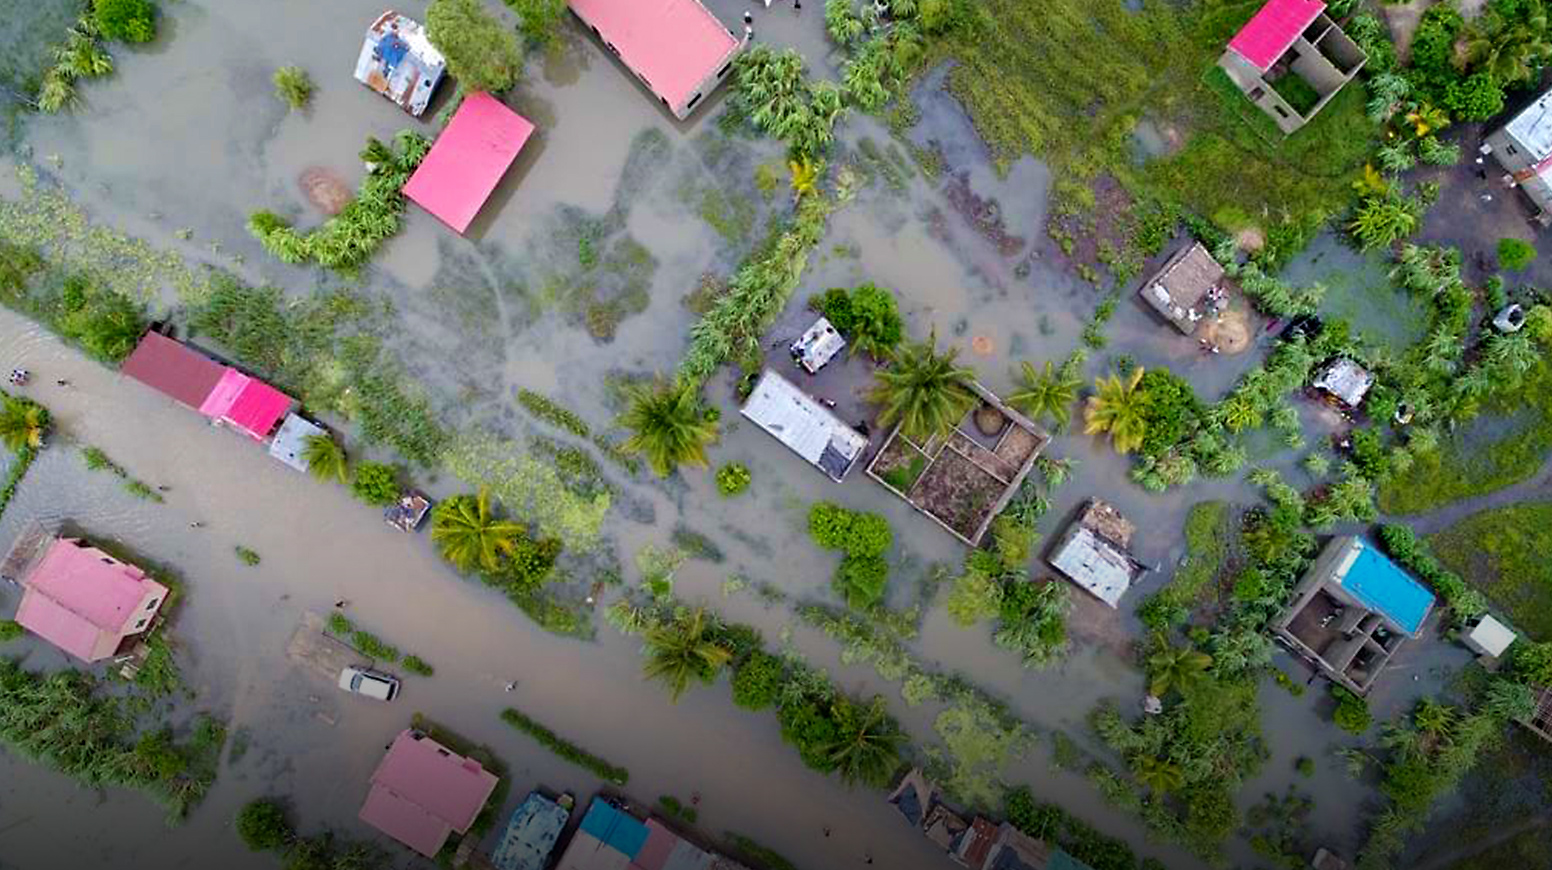 An overhead view of a flooded residential area in Mozambique